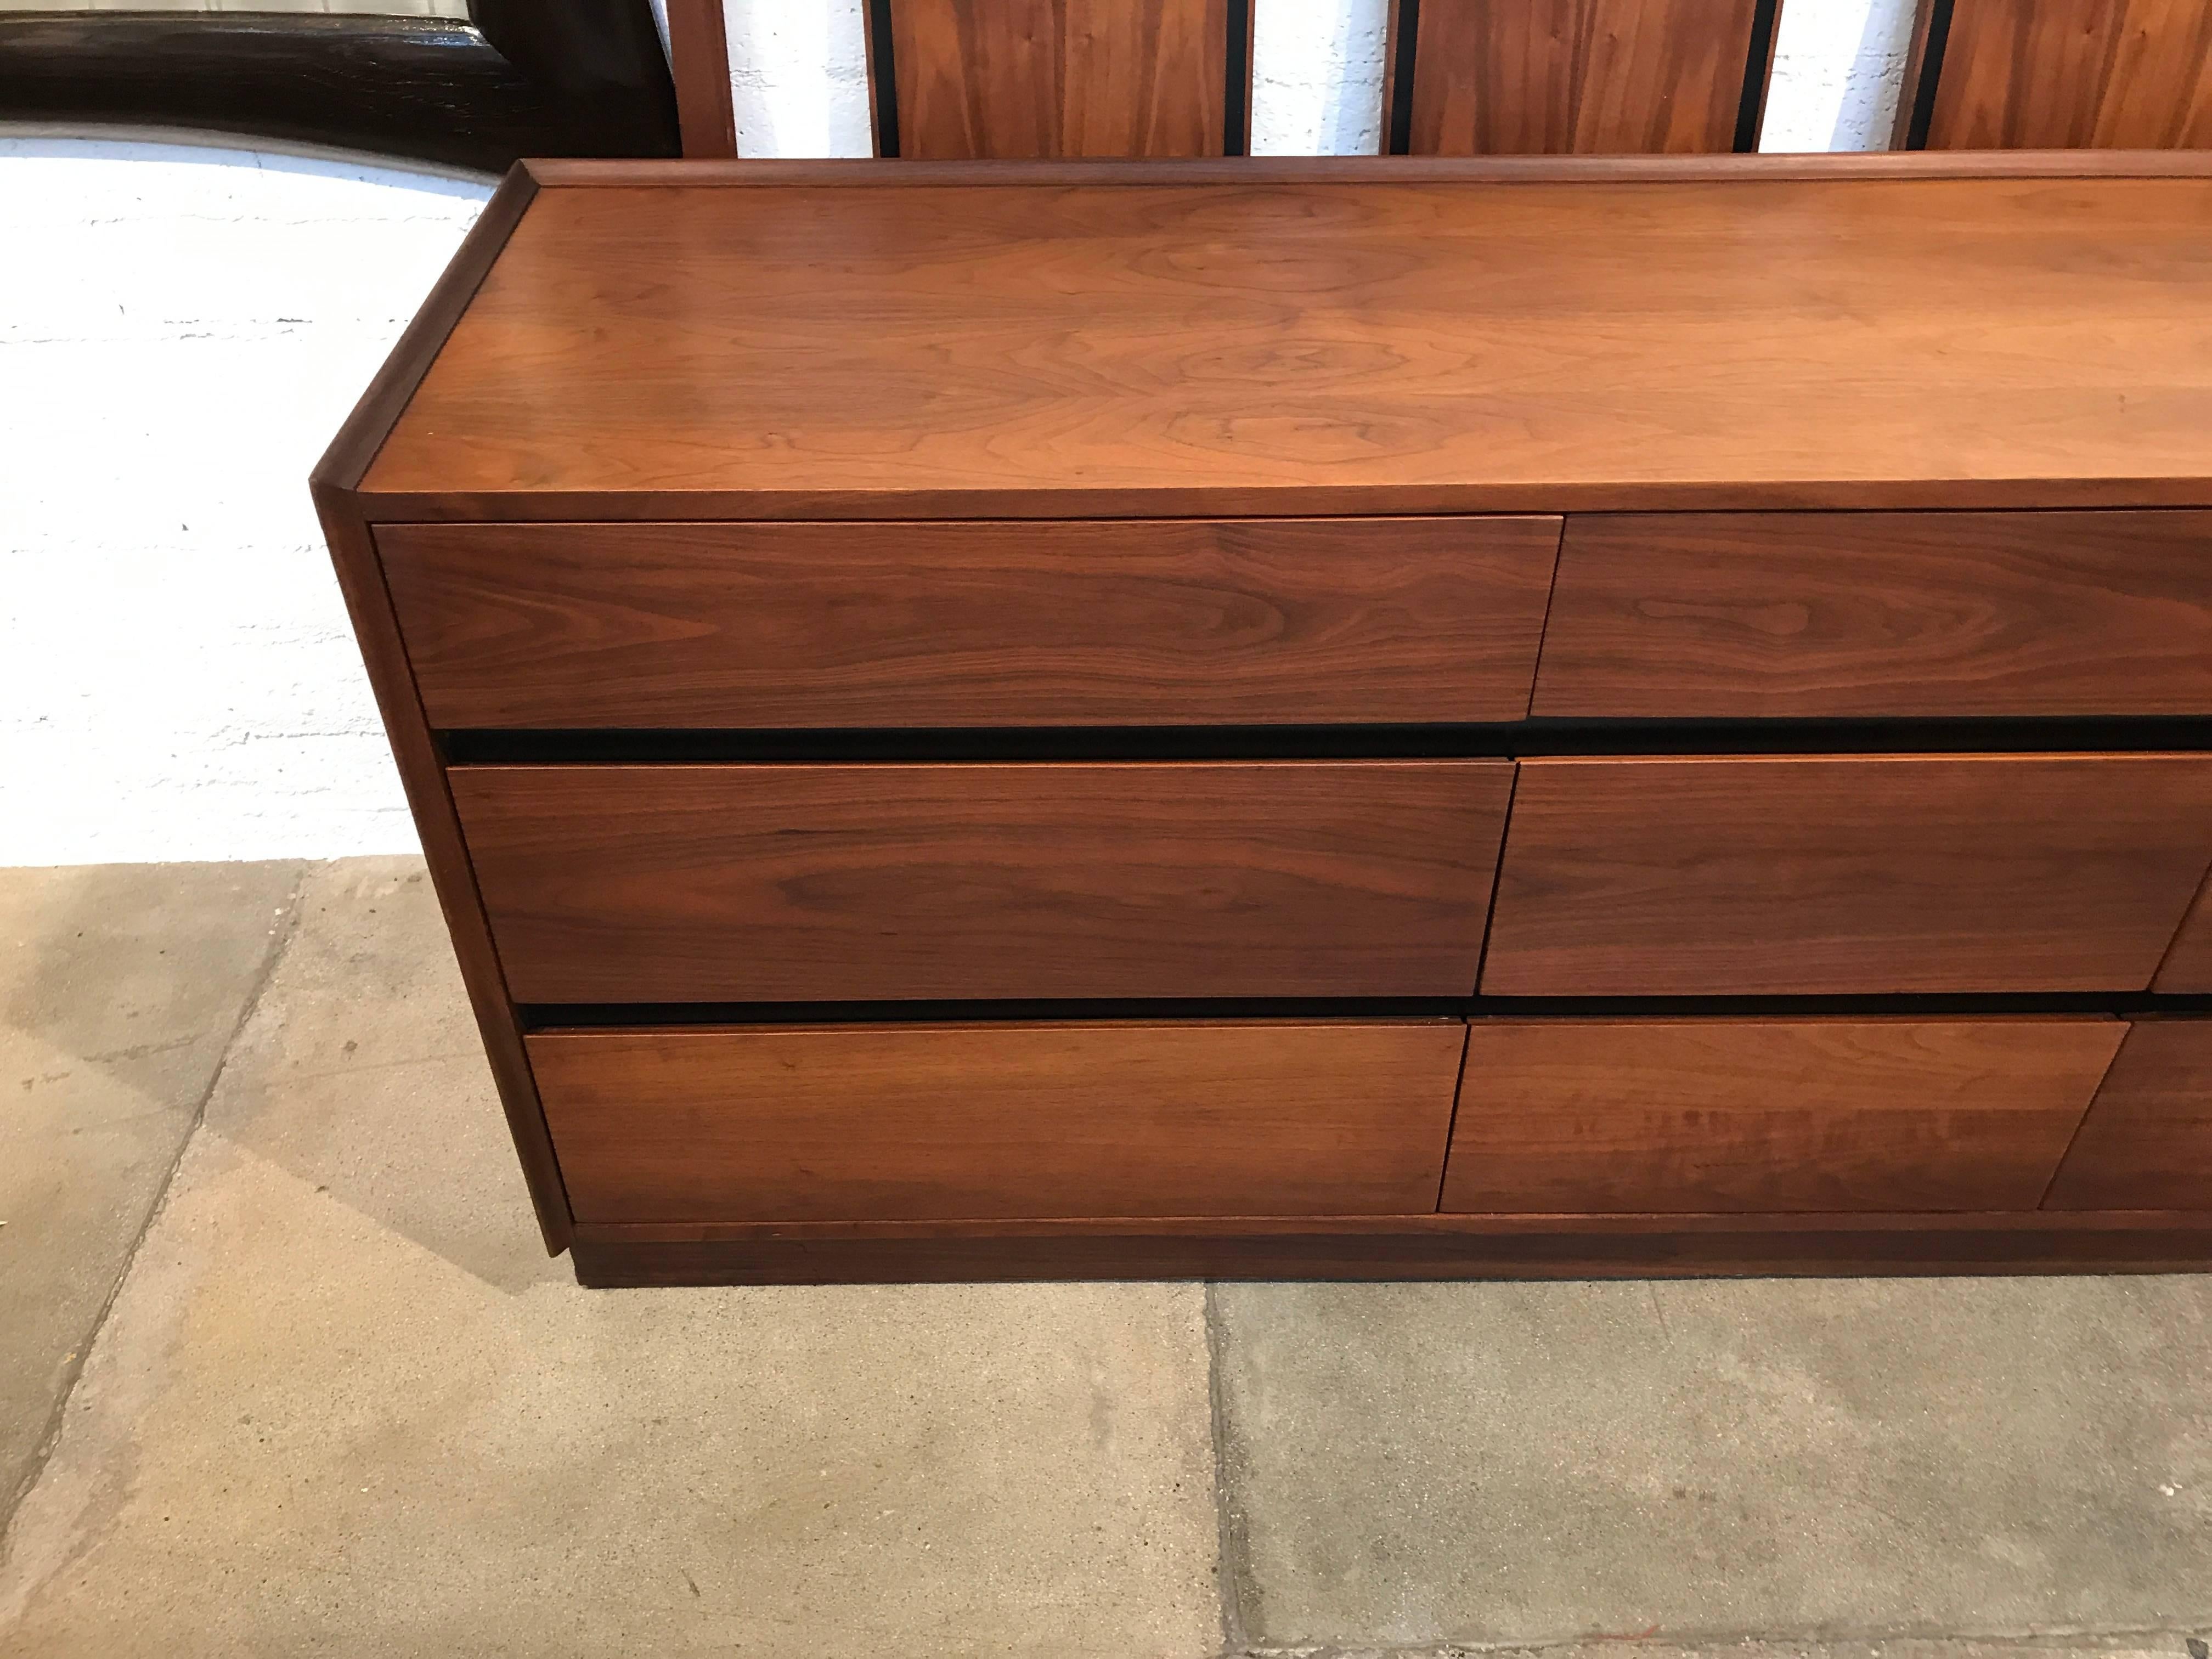 A nice nine-drawer walnut dresser by Dillingham in good age appropriate condition. Labeled as well. There are some marks and surface scratches but in good age appropriate condition.